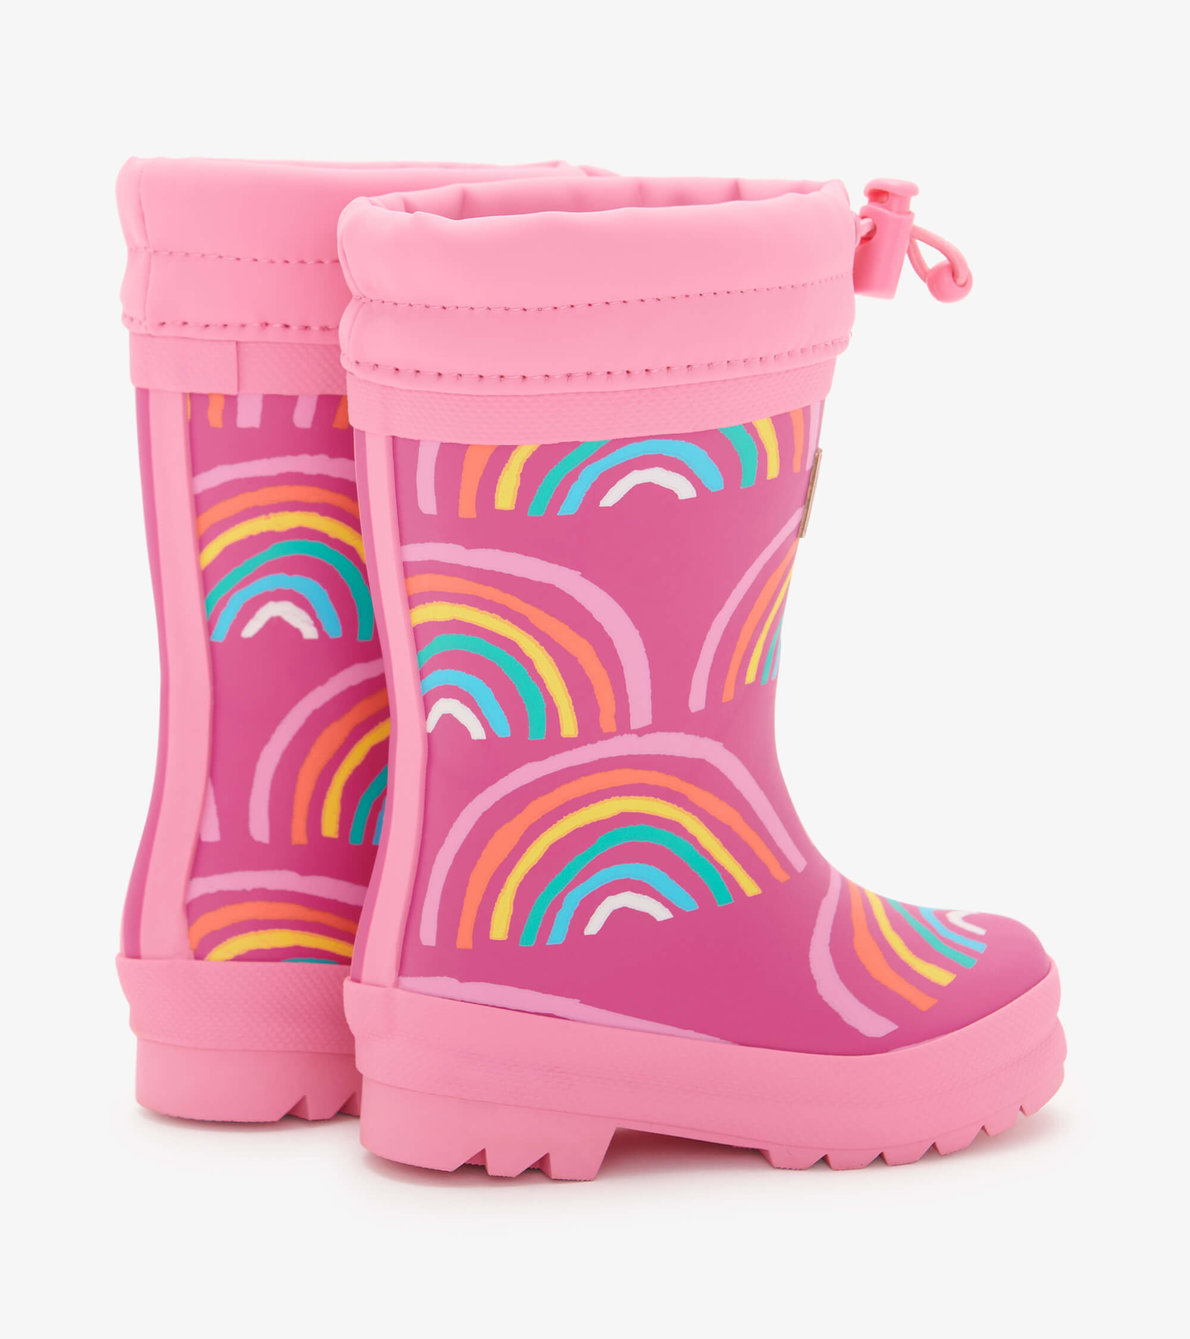 View larger image of Rainy Rainbows Sherpa Lined Baby Rain Boots